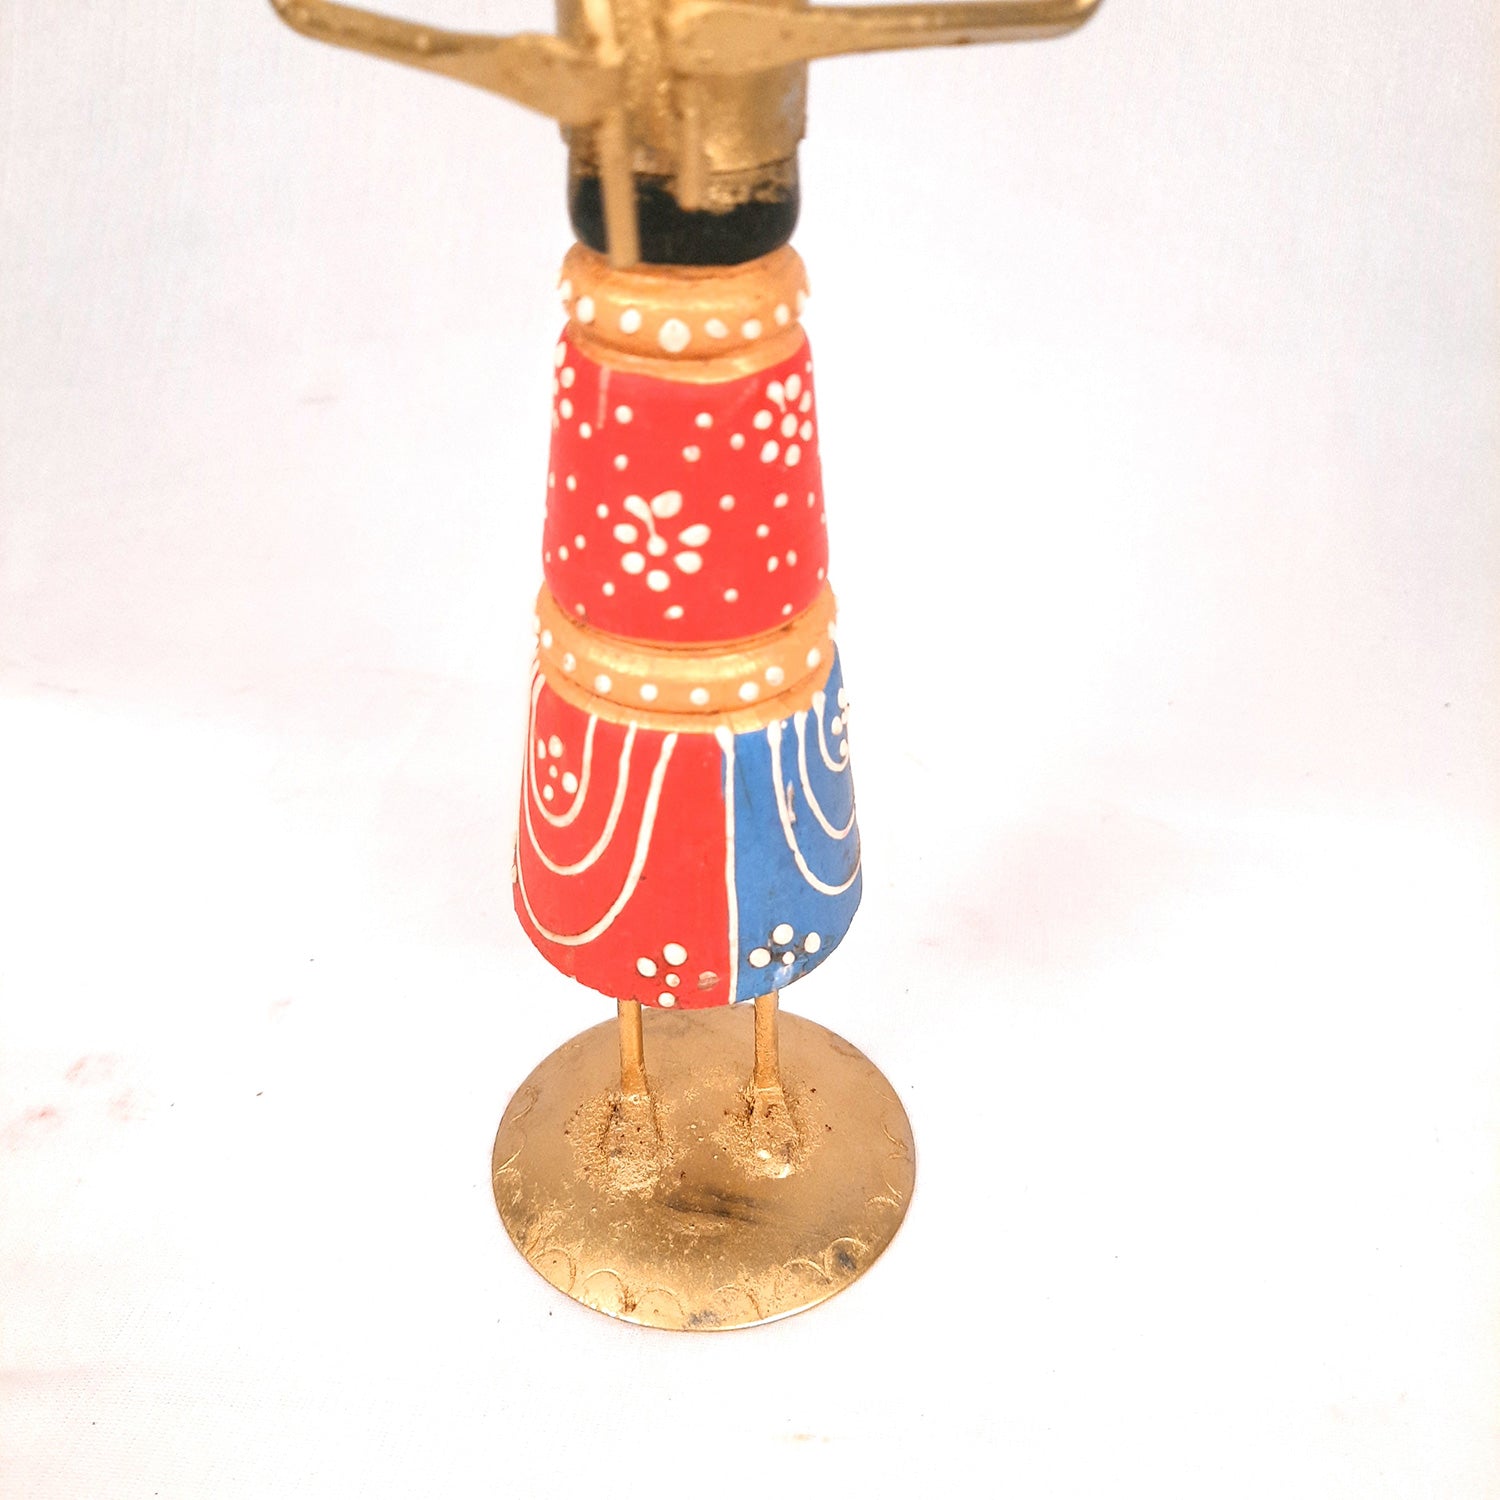 Showpiece Musician | Decorative Tribal Musician Figurine - For Home, Table, Living Room & TV Unit | Show Piece For Office Desk & Gifts - 12 Inch - Apkamart